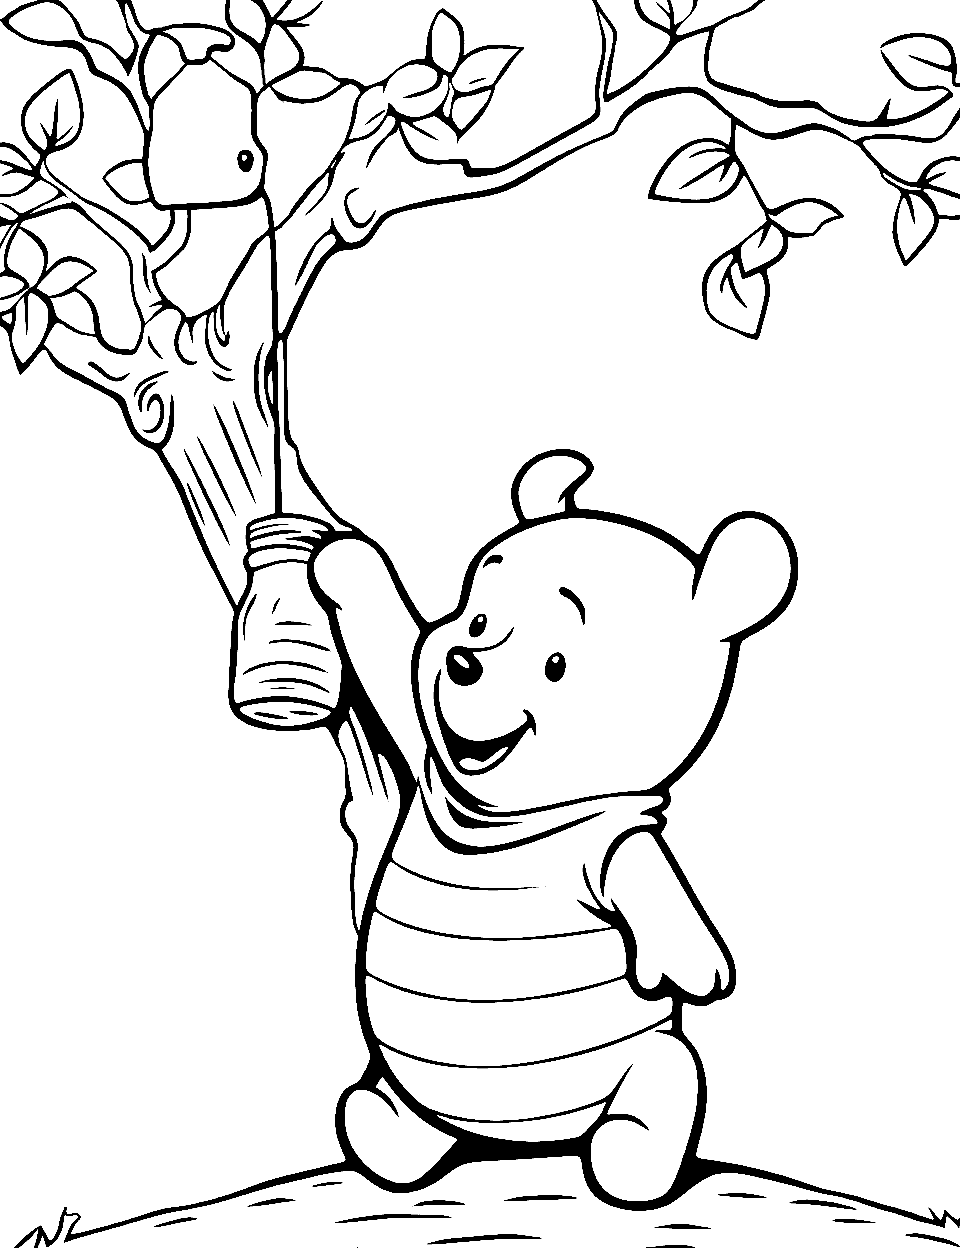 Pooh Bear and Honey Coloring Page - A joyful Pooh Bear collecting honey hanging from a tree.